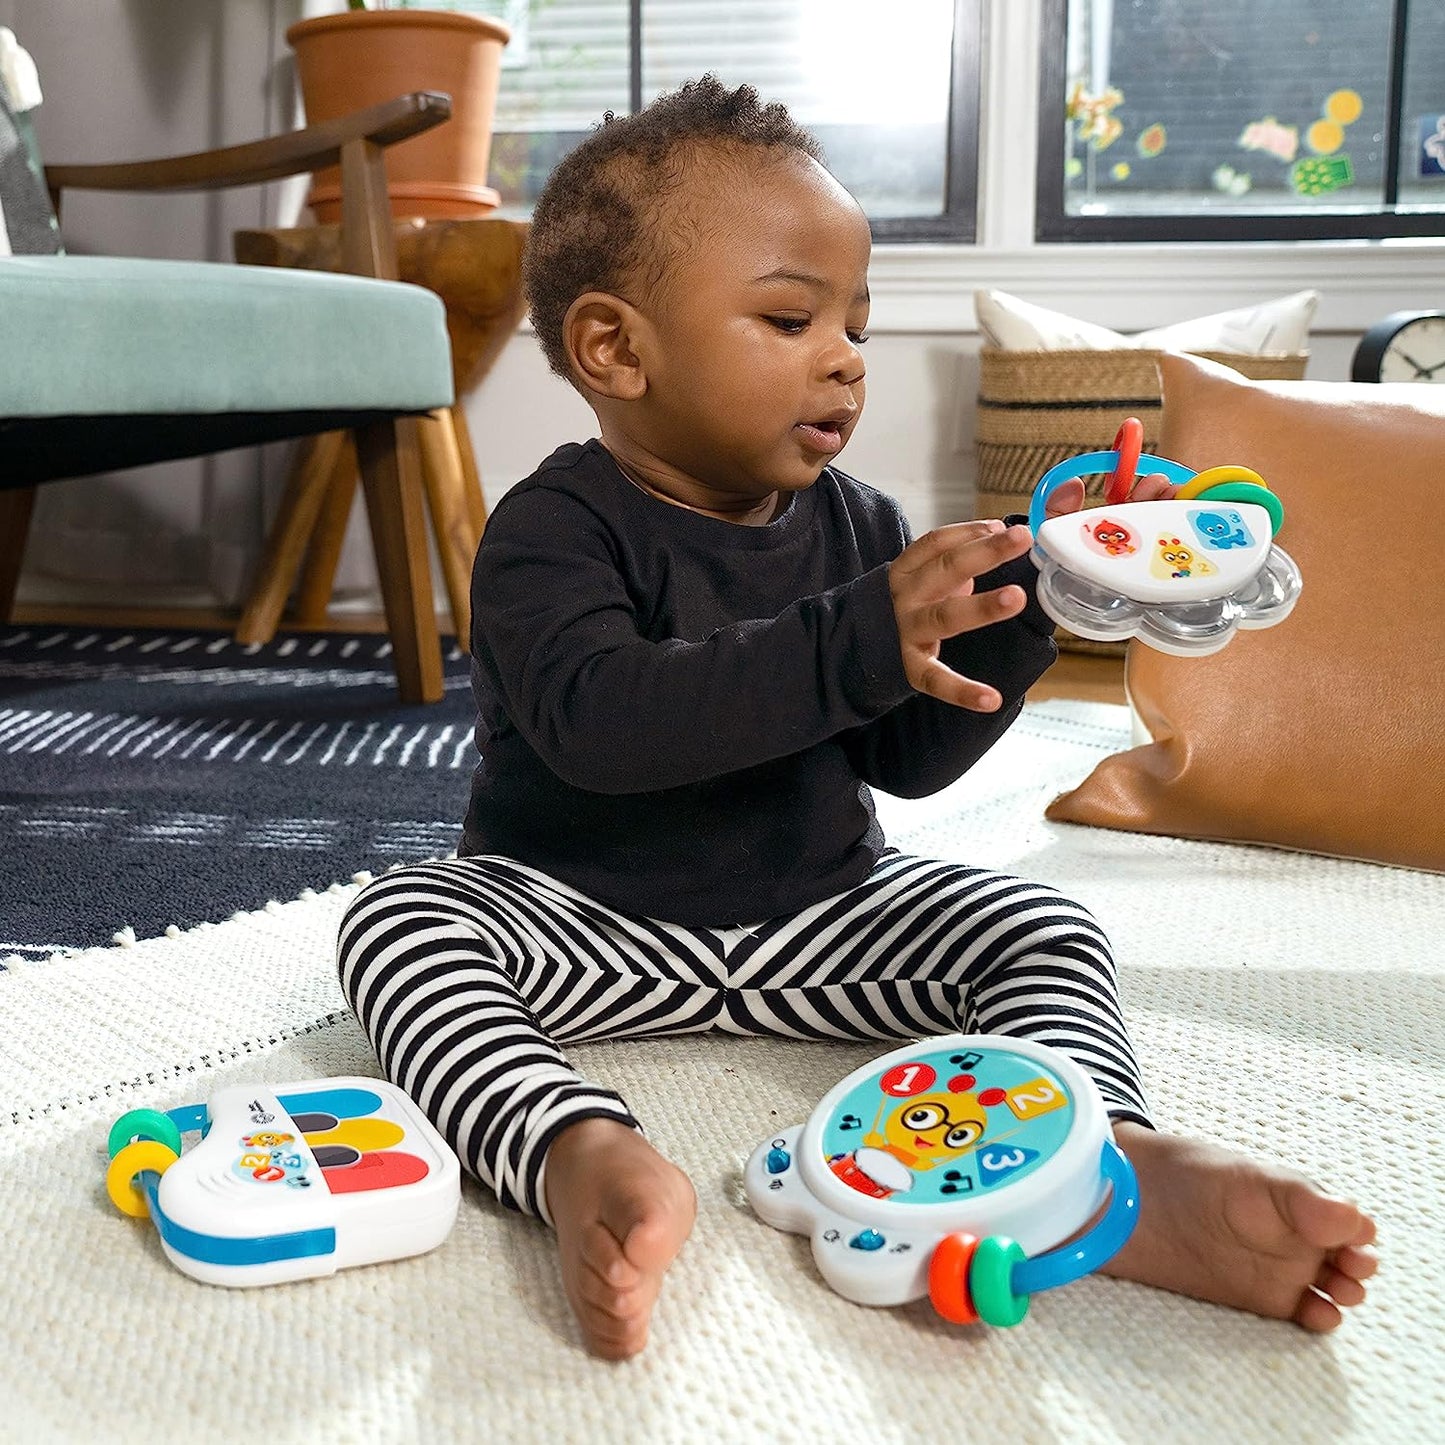 Small Symphony 3-Piece Musical Toy Set, Ages 3+ Months, for Boy or Girl